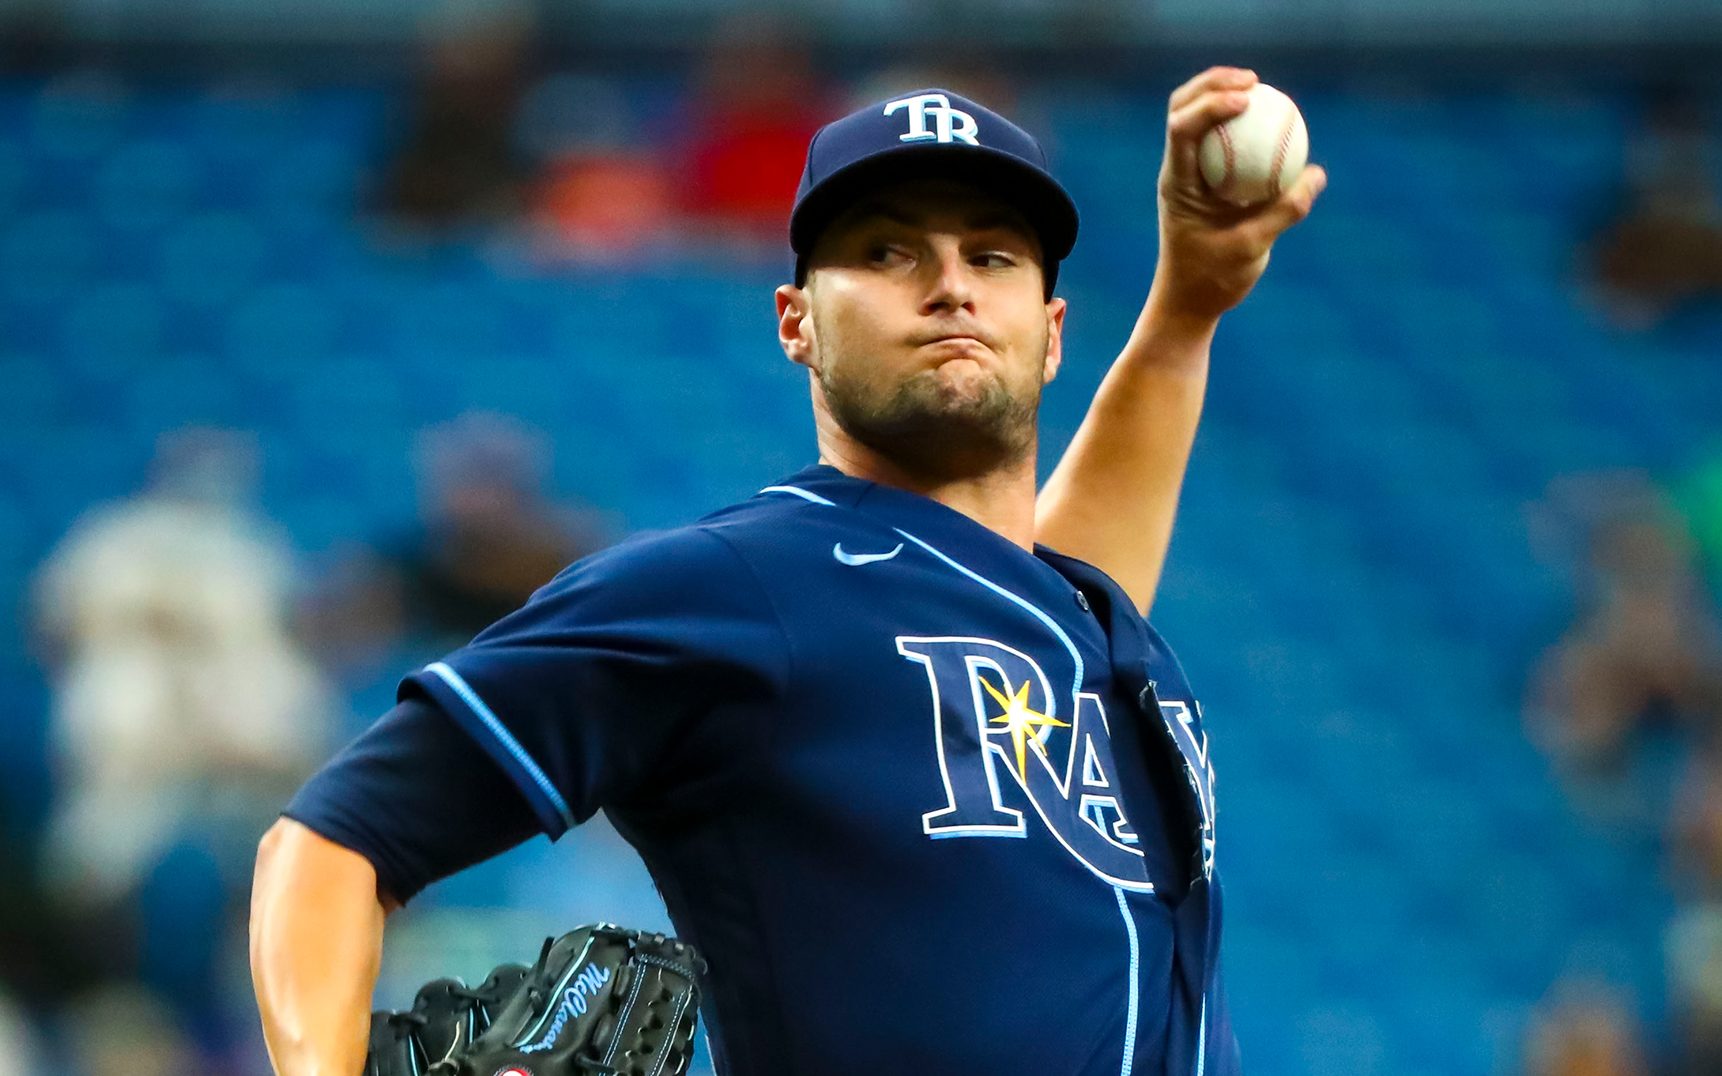 Left-hander Shane McClanahan to start with Rays first Division Series game